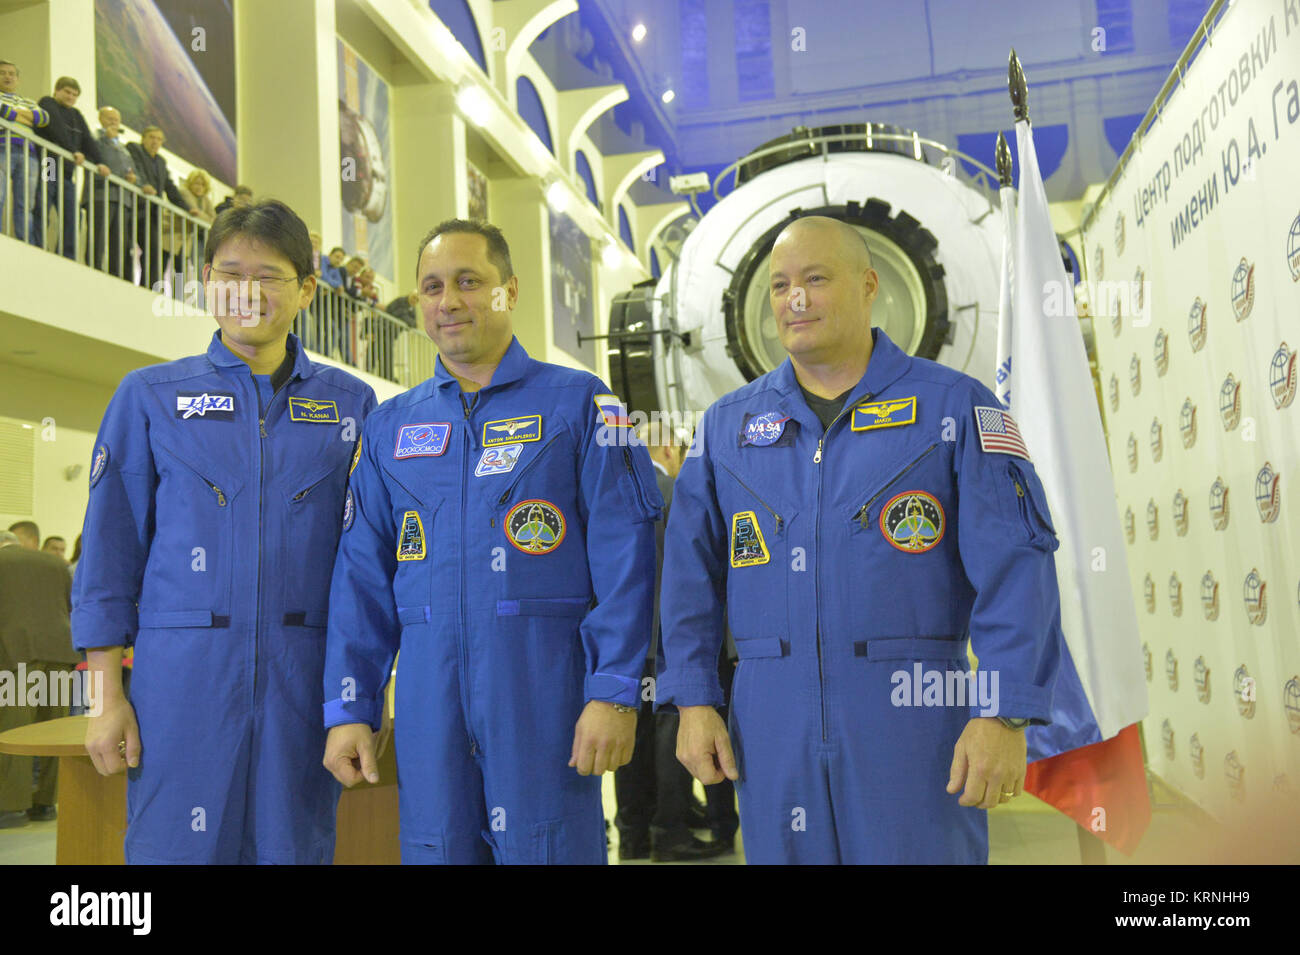 At the Gagarin Cosmonaut Training Center in Star City, Russia, Expedition 54-55 prime crewmembers Norishige Kanai of the Japan Aerospace Exploration Agency (JAXA, left), Anton Shkaplerov of the Russian Federal Space Agency (Roscosmos, center) and Scott Tingle of NASA (right) pose for pictures Nov. 28 as part of the crew’s final qualification exam activities. They will launch Dec. 17 on their Soyuz MS-07 spacecraft for a five-month mission on the International Space Station.  NASA/Elizabeth Weissinger Soyuz MS-07 crew at the Gagarin Cosmonaut Training Center in Star City Stock Photo